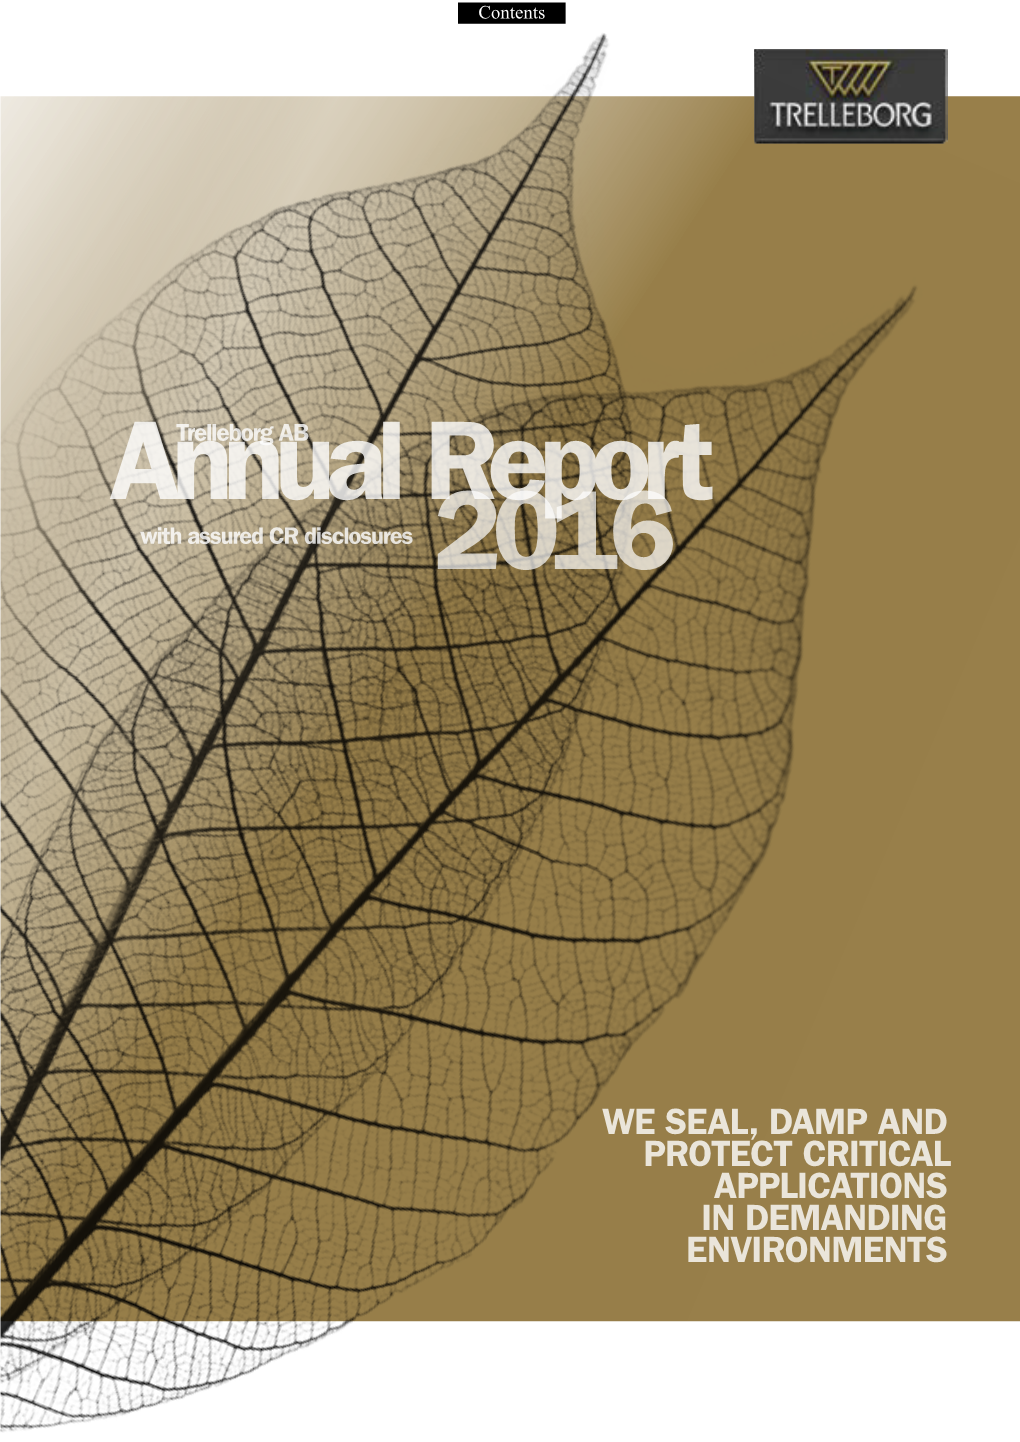 ANNUAL REPORT 2016 Annualtrelleborg AB Report with Assured CR Disclosures 2016